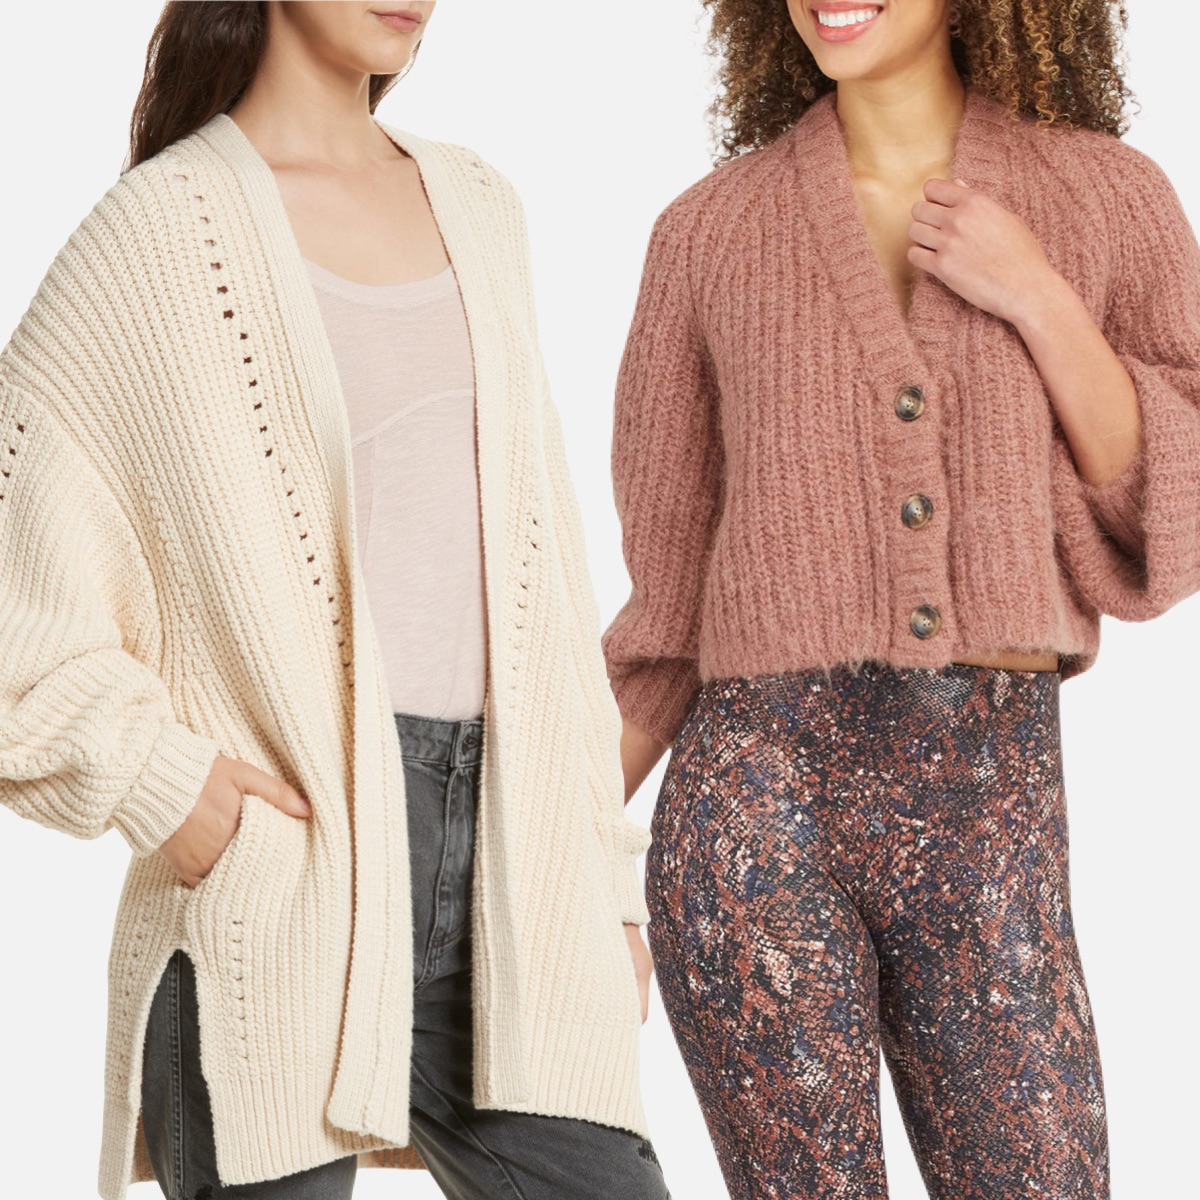 Nordstrom Extra 25% Off Clearance: UGG, Tory Burch, Free People & More